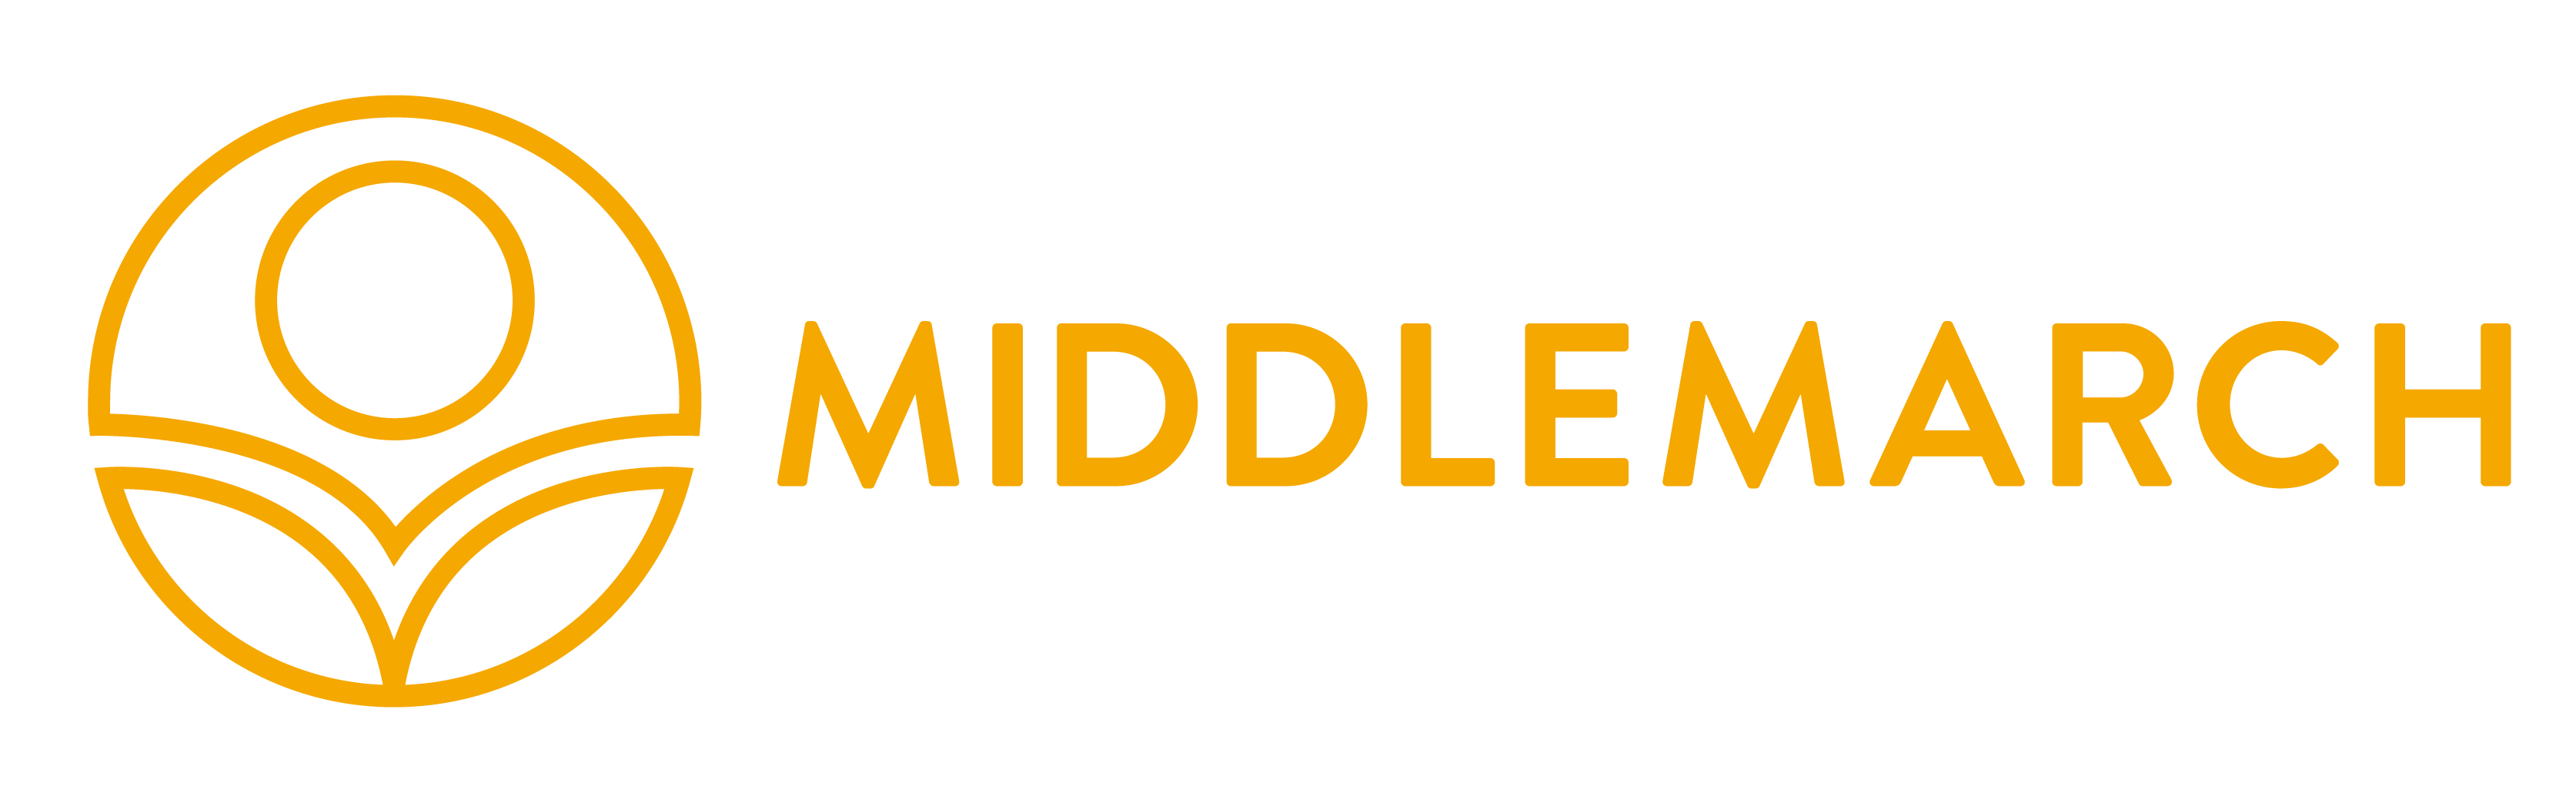 logo for Middlemarch Environmental